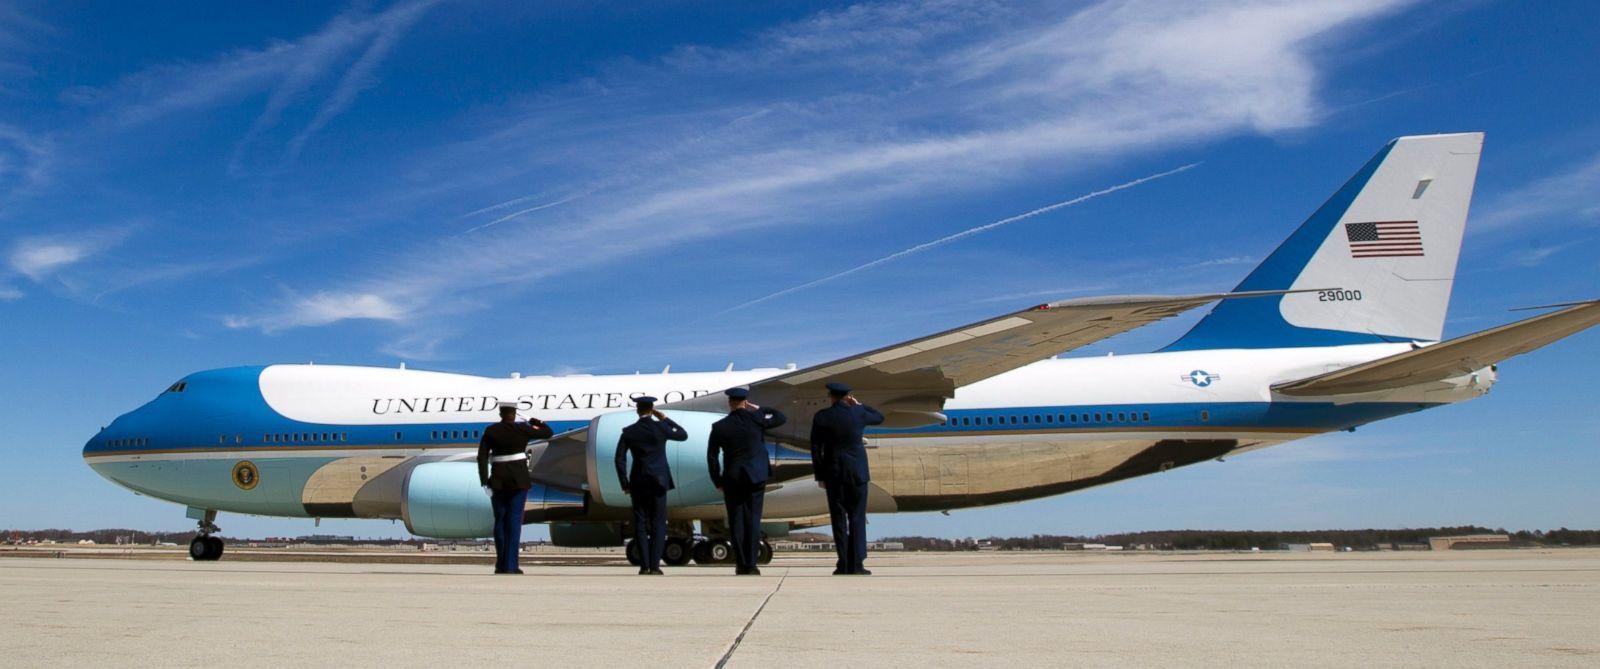 Air Force One wallpaper, Military, HQ Air Force One pictureK